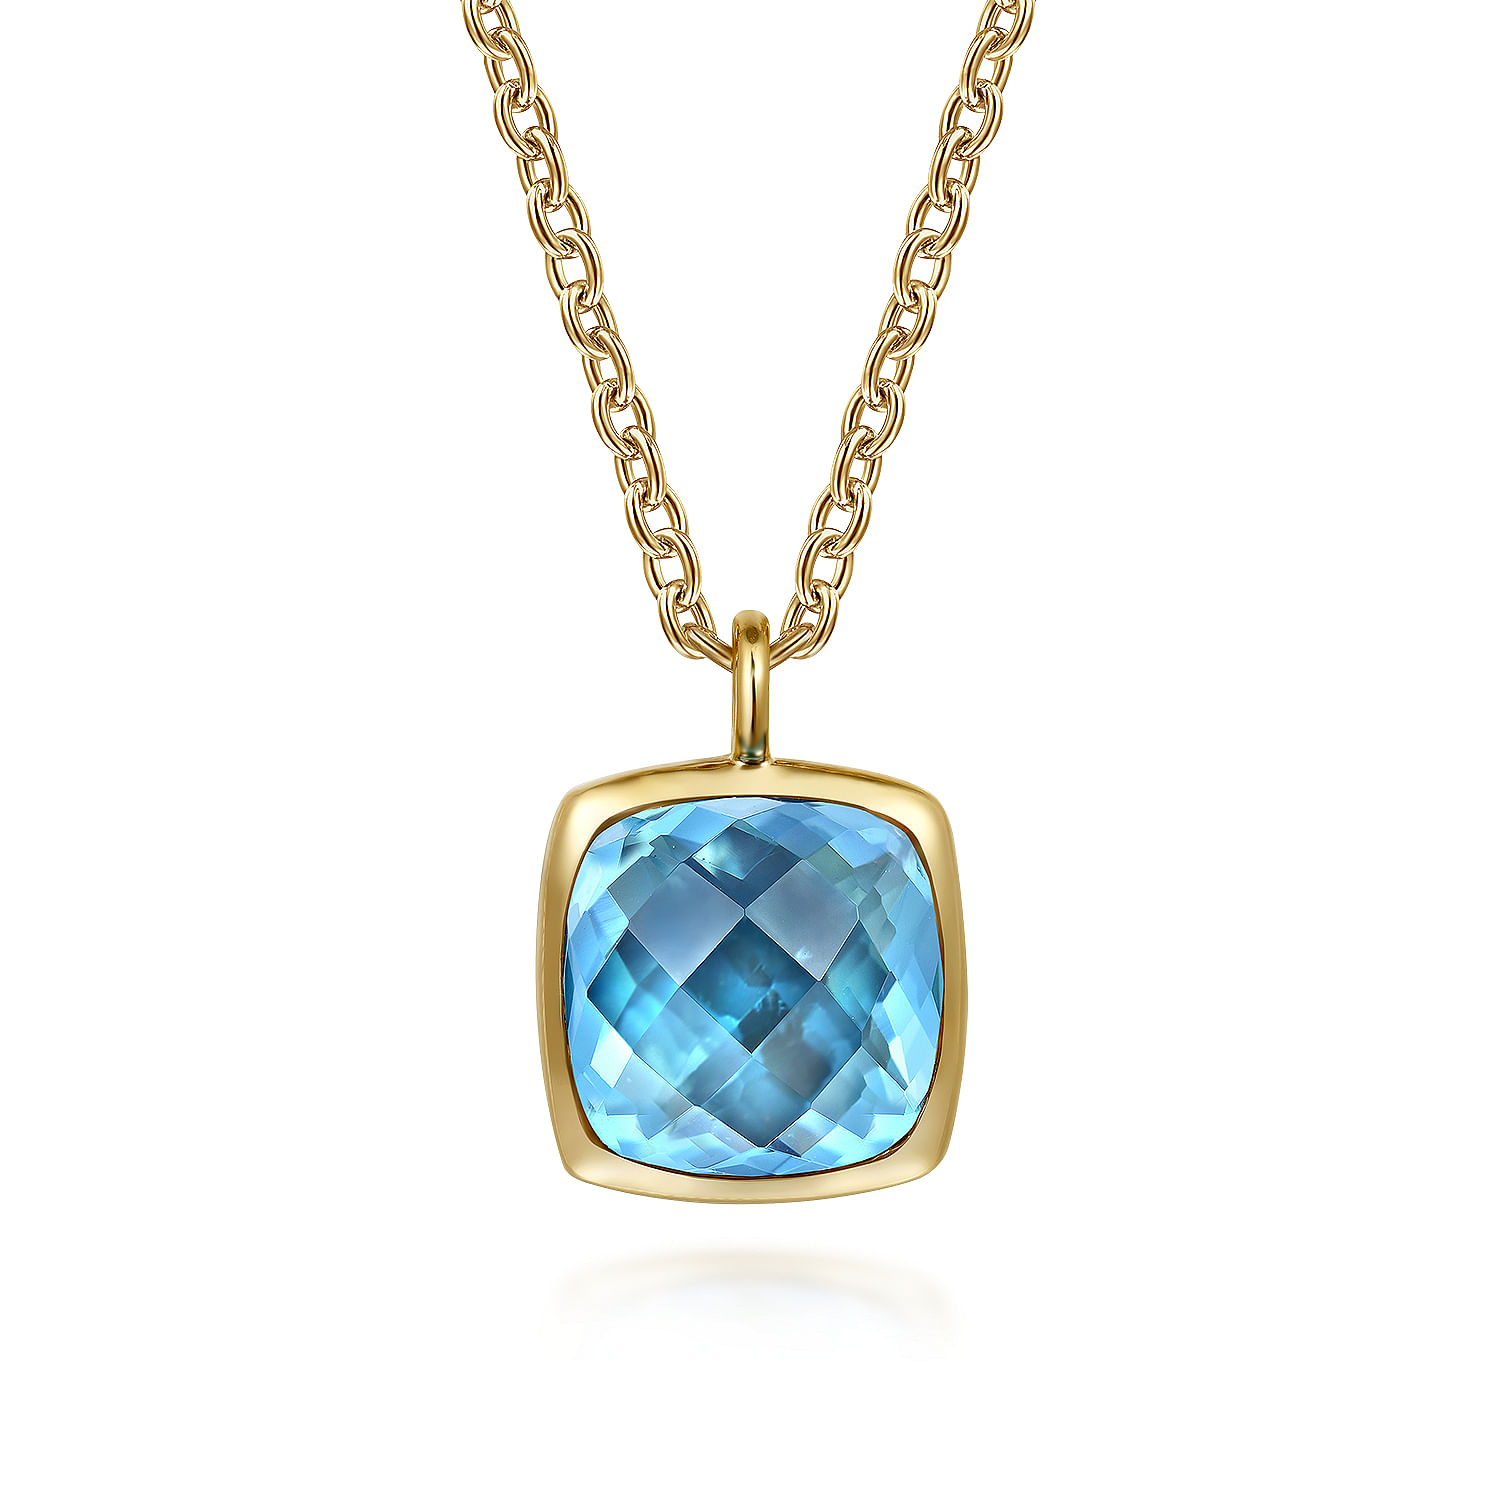 Gabriel - 14K Yellow Gold Cushion Cut Blue Topaz Necklace With Flower Pattern J-Back and Bezel Setting